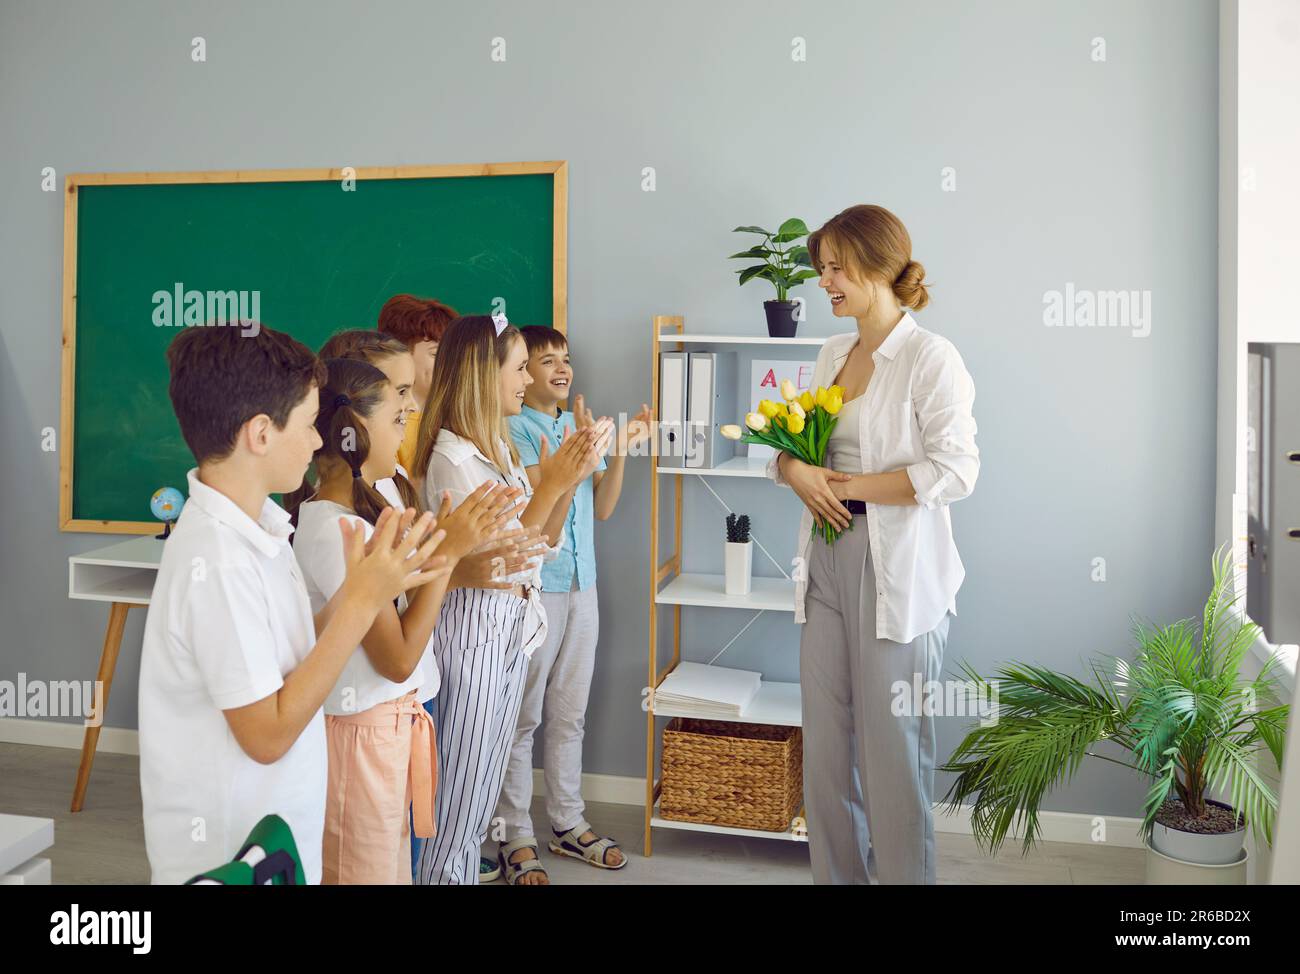 Children students giving flowers to their teacher clapping hands congratulating on holiday. Stock Photo